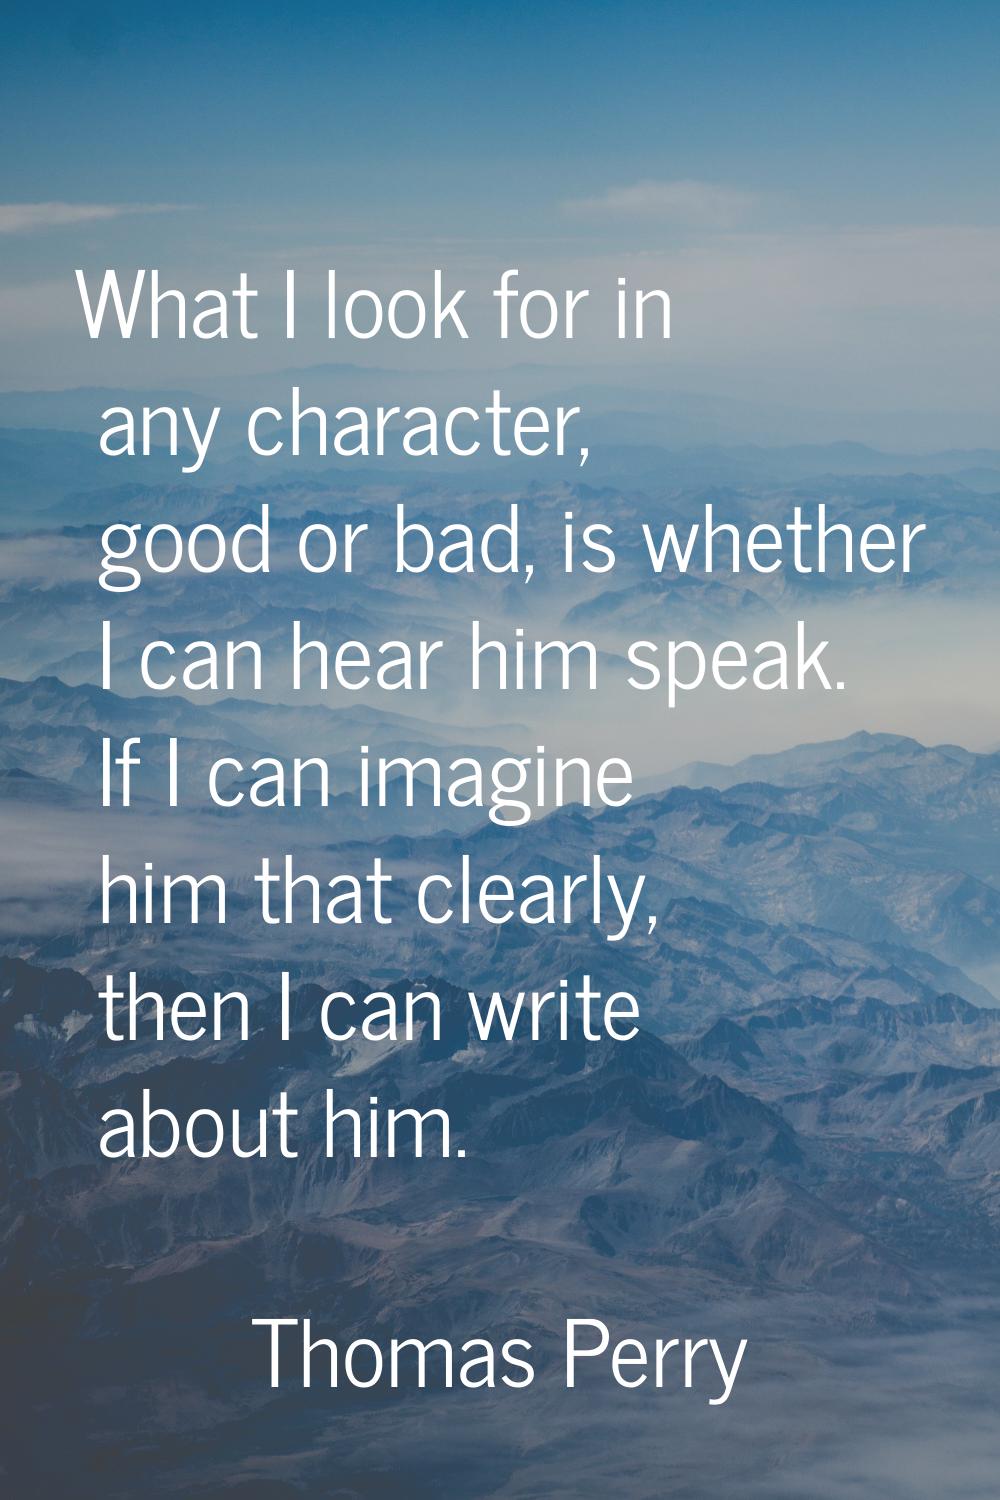 What I look for in any character, good or bad, is whether I can hear him speak. If I can imagine hi